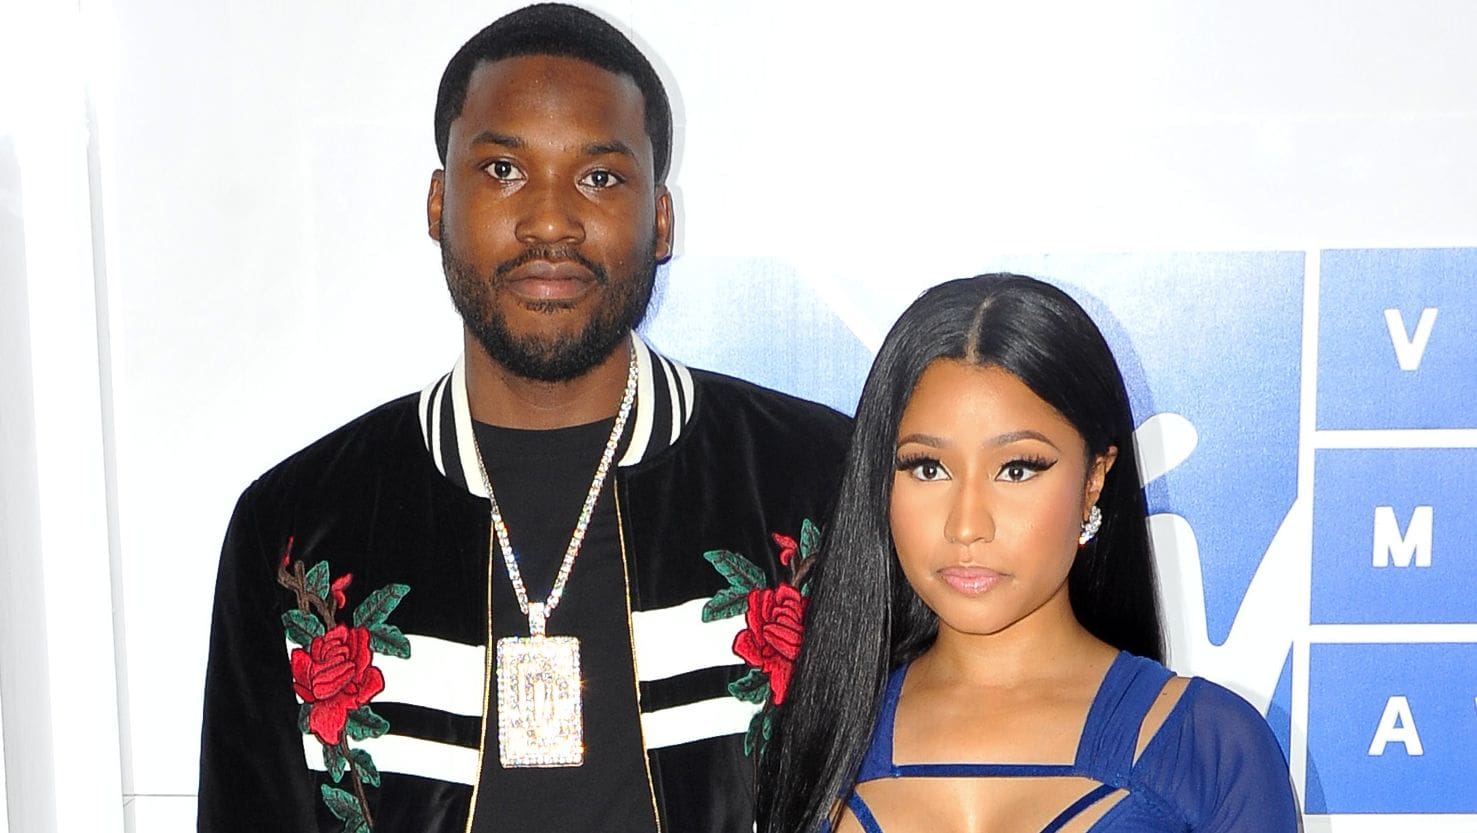 ”meek-mill-mentions-nicki-minaj-and-her-baby-during-clubhouse-chat-and-fans-slam-him-for-being-obsessed-with-her”